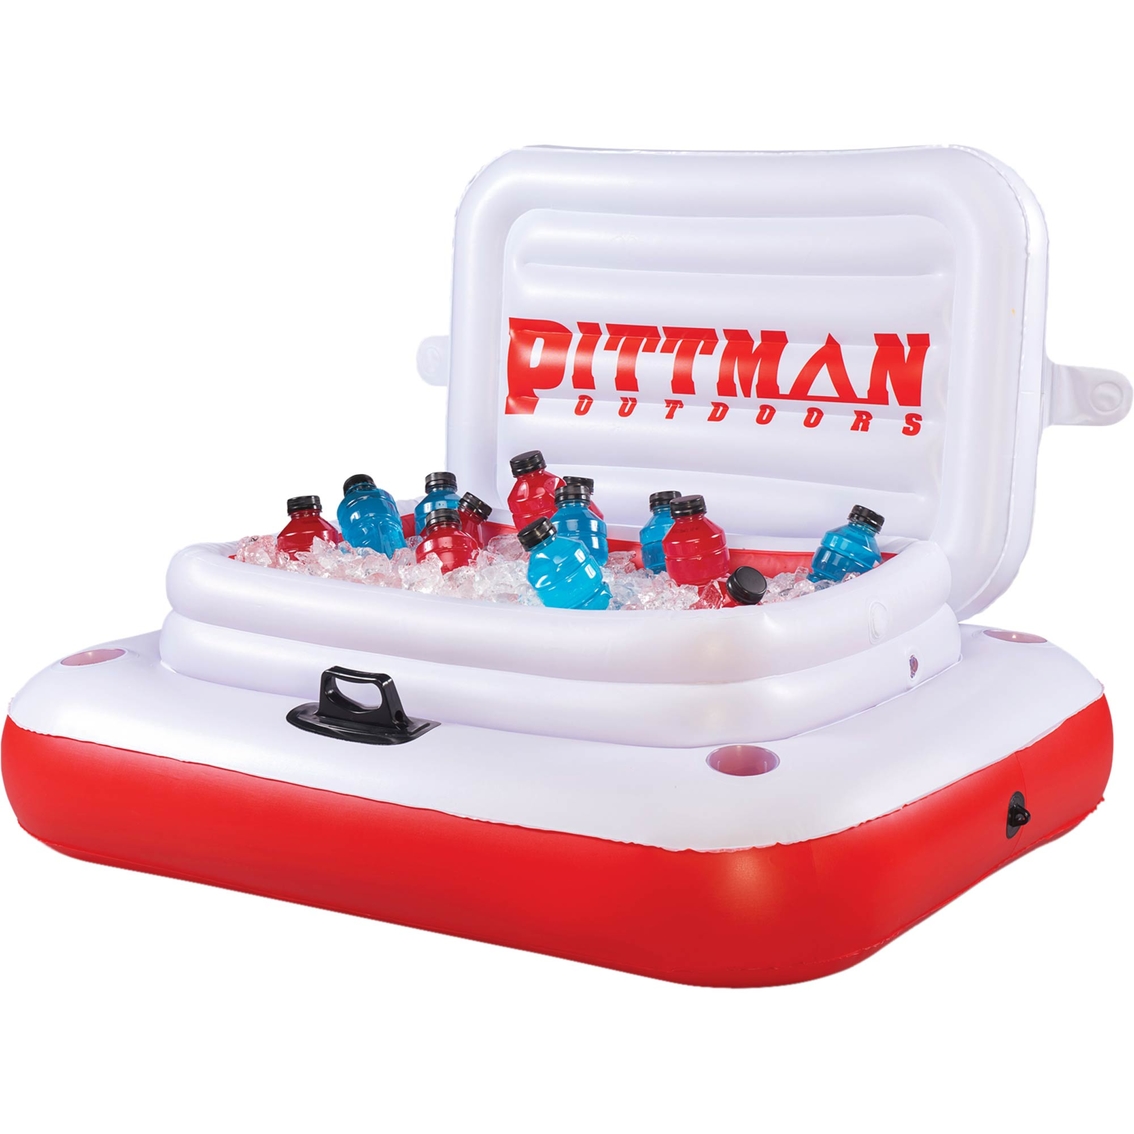 Pittman Outdoors River Drifter Large Floating Ice Chest - Image 2 of 2